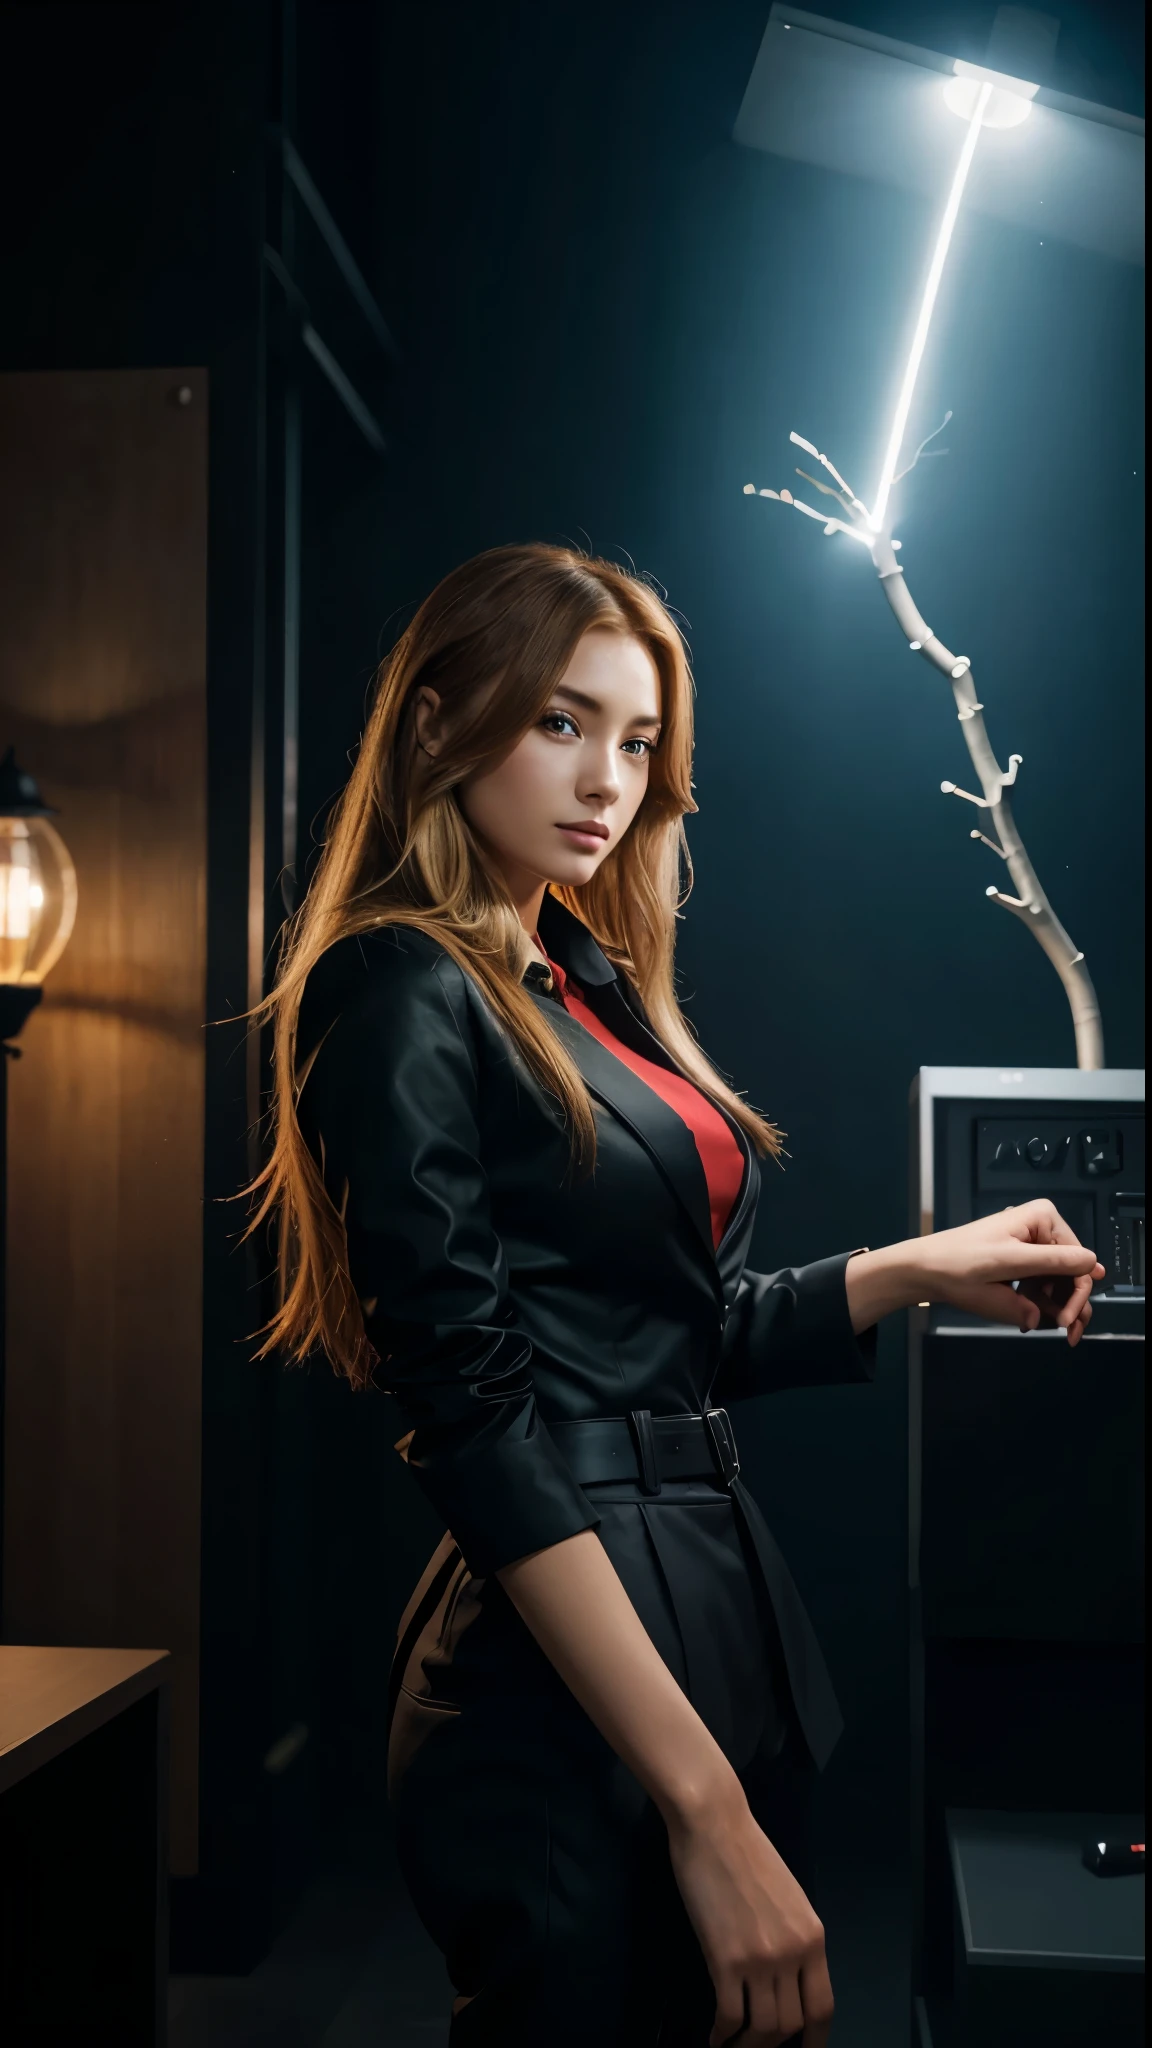 (Realistic:0.2)、Anime illustration、 1 Girl、Red coat、Blonde Hair、 A stage set in Paris, France『Workplace(SFW)』 Black trousers、Black office shirt、 Carmen Sandiego Features、 Bright blue sky、Dramatic long hair、 Under an impressive lightning display、 Shine light directly on your face、Magnifying Light、 Backlight、The face is illuminated、 Fill Lamp、FIL Light、(masterpiece)、 Carmen Sandiego Version 1.1 - Shurik's Artwork: